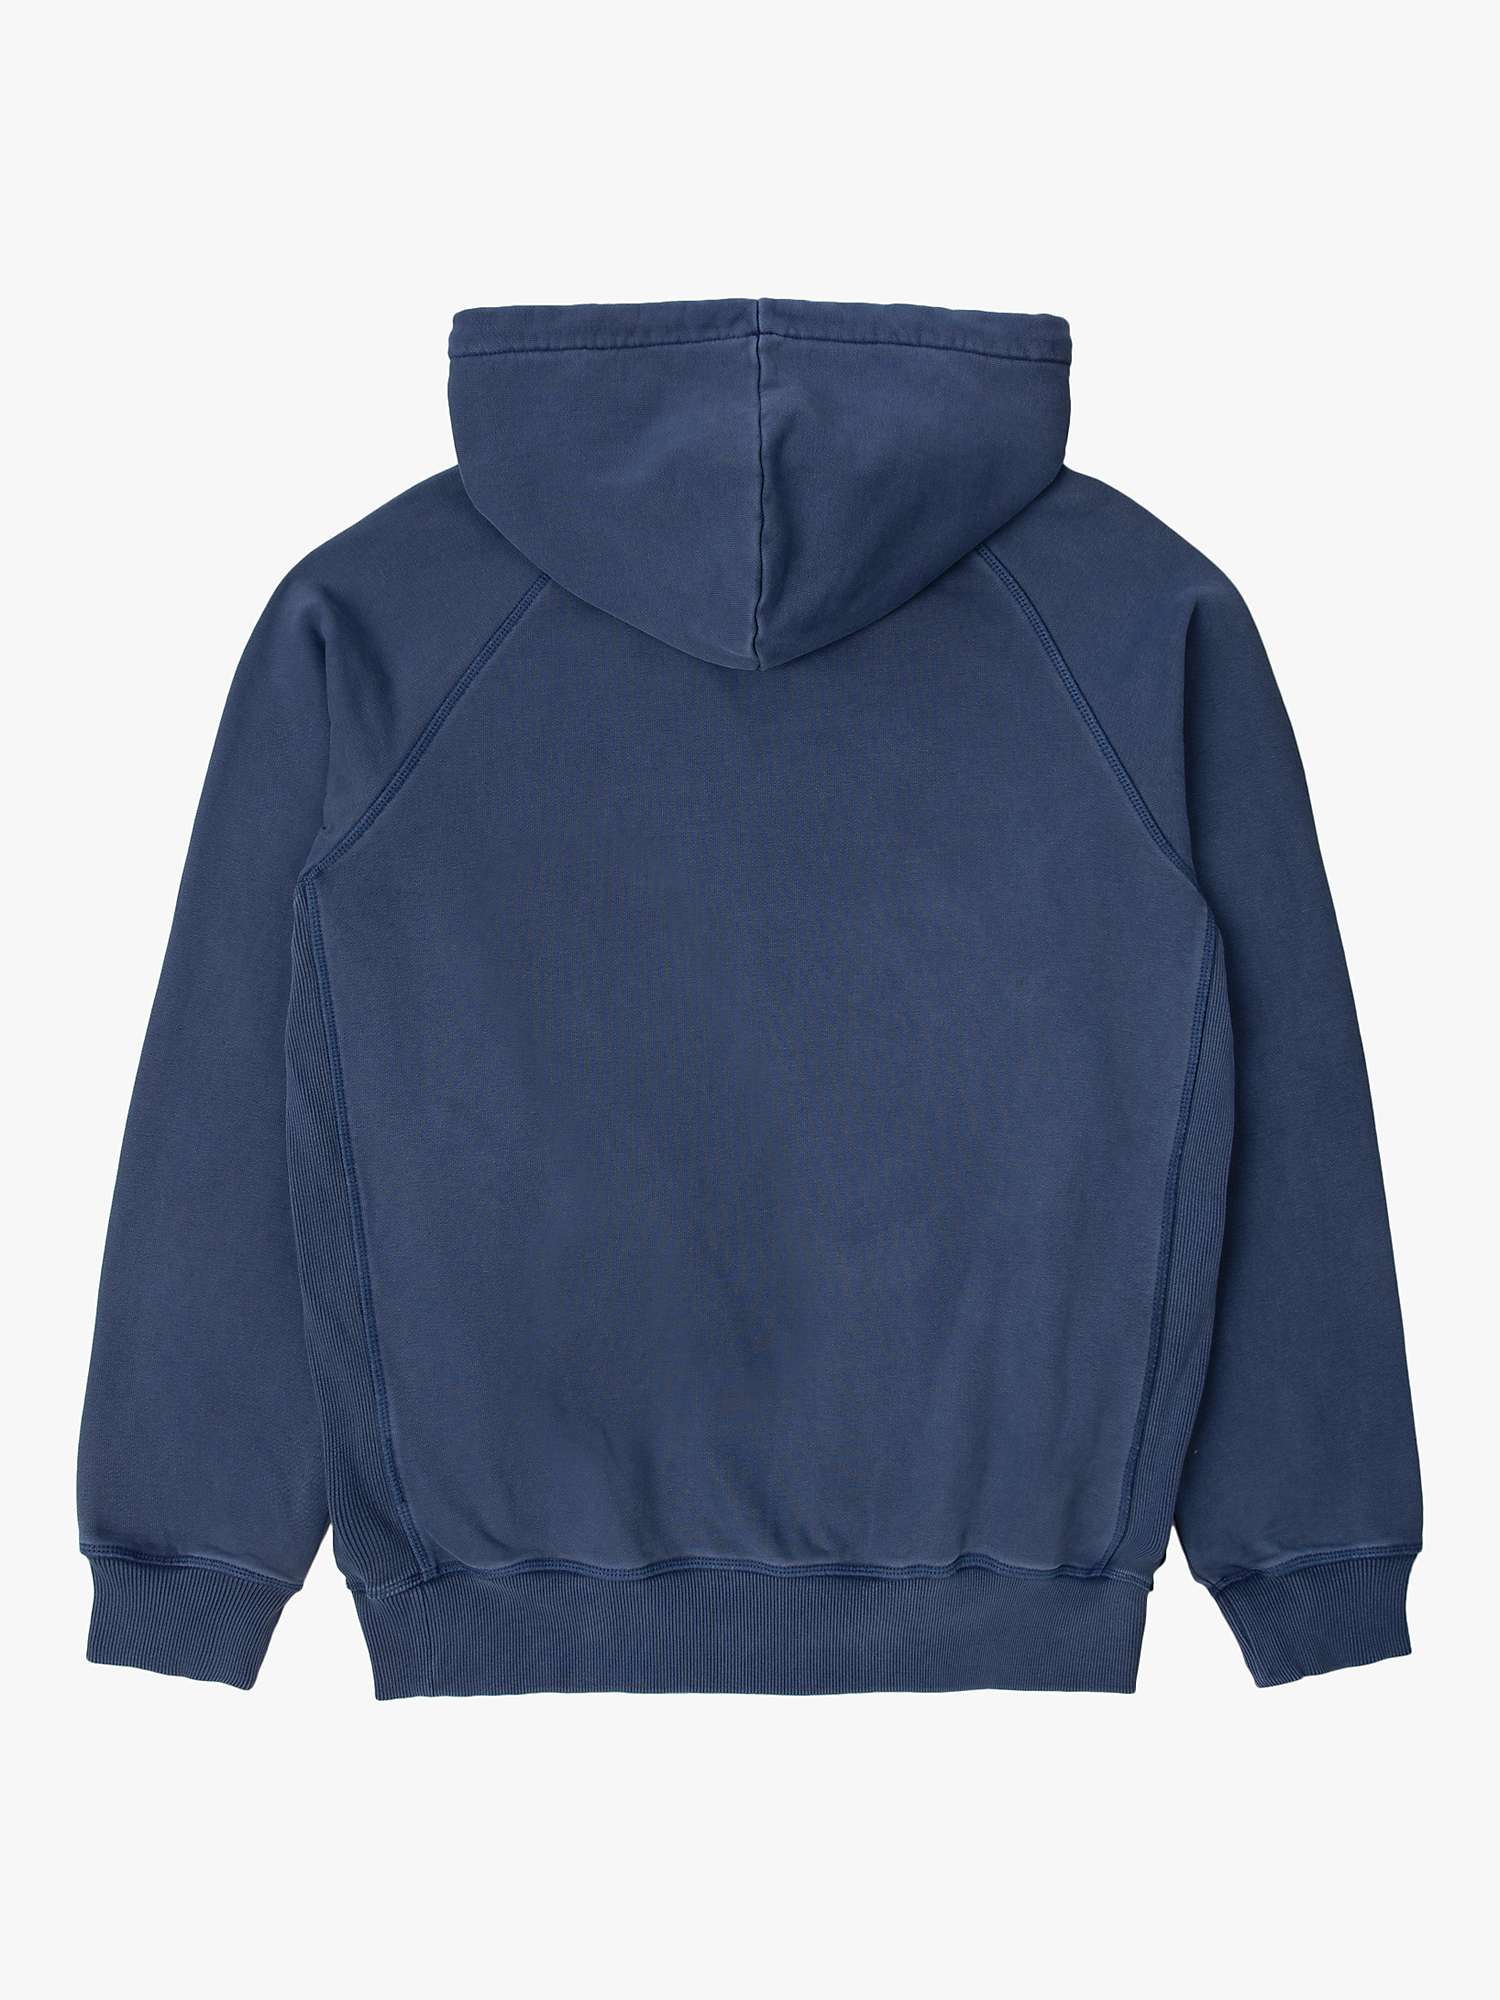 Buy M.C.Overalls Relaxed Cotton Hoodie Online at johnlewis.com